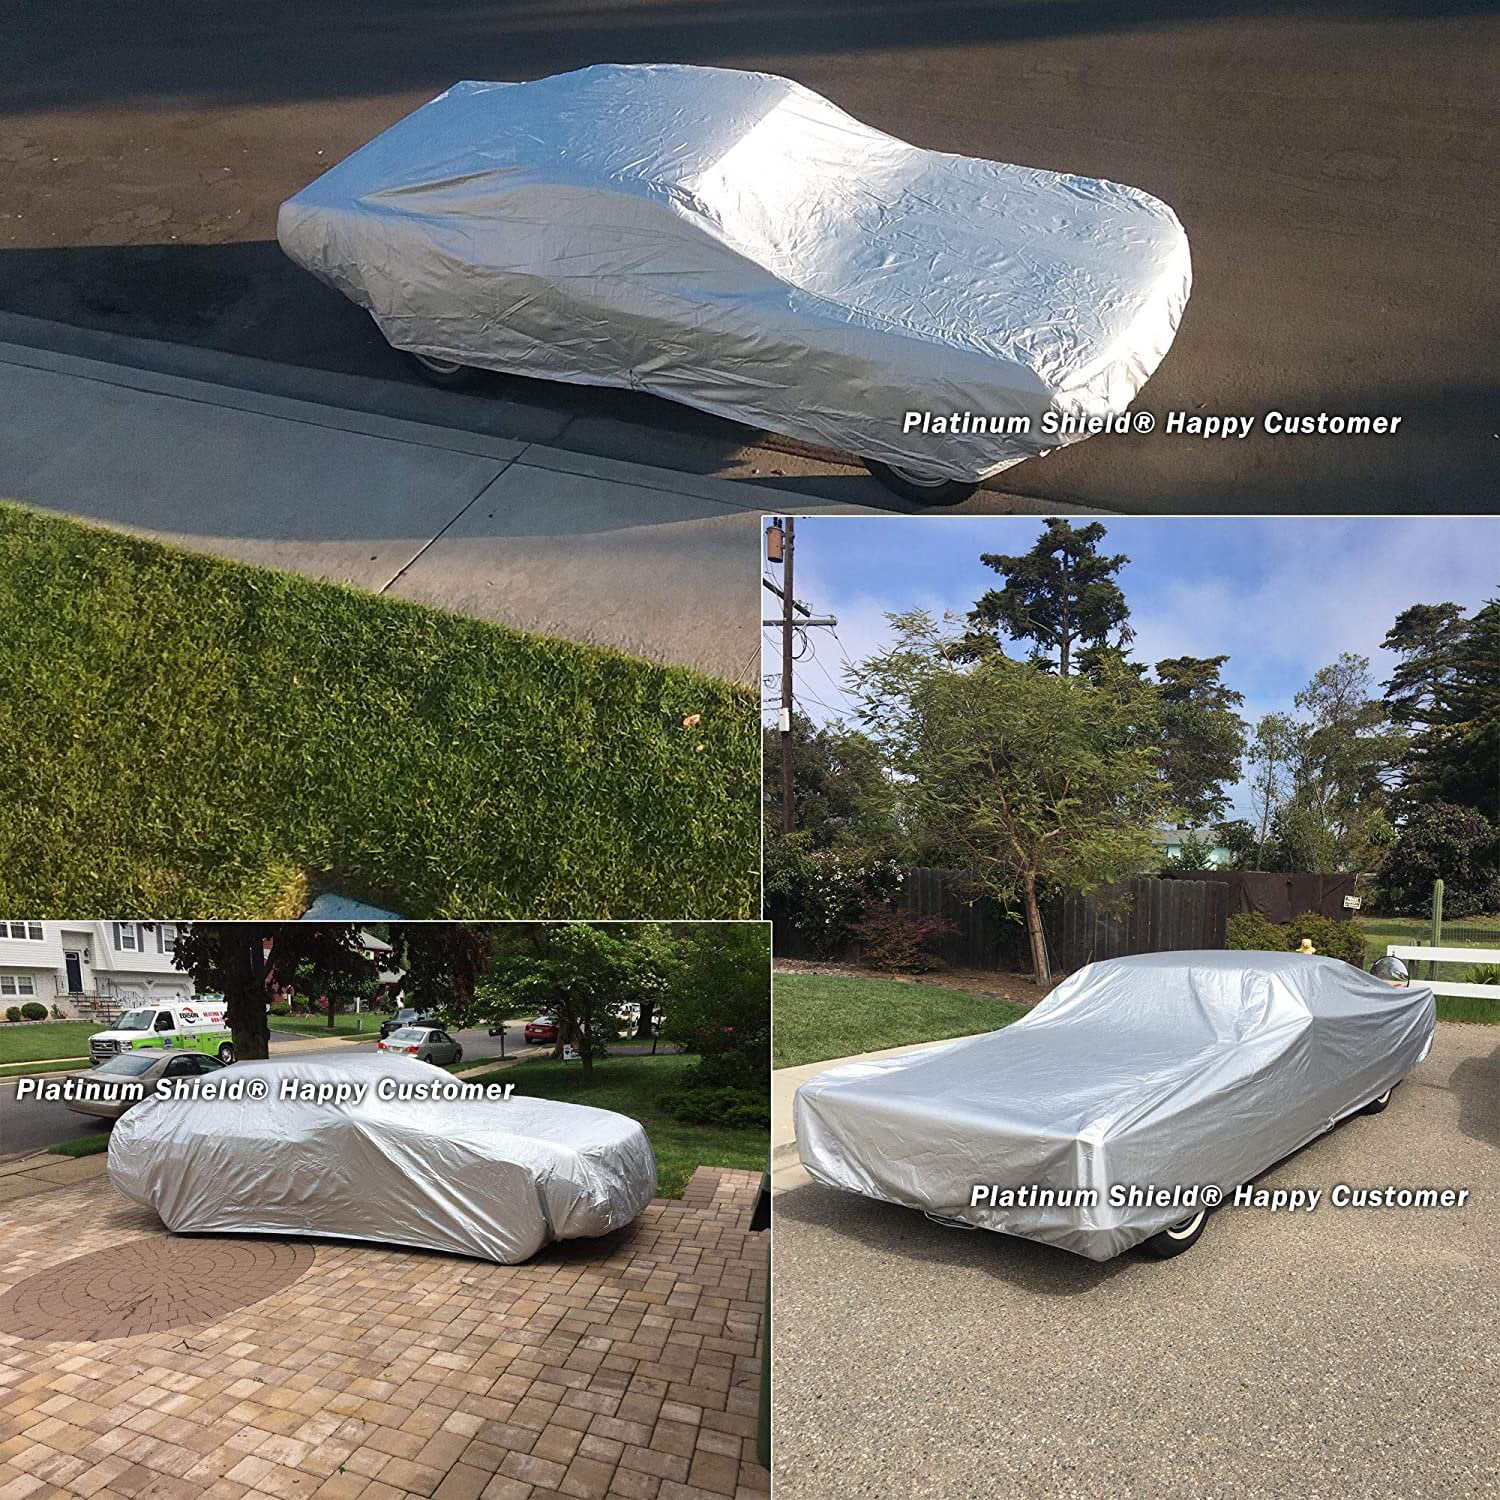 Platinum Shield Weatherproof Car Cover Compatible with 2008 Jaguar XKR  Coupe,Convertible 2 Door - Protect Water, Snow, Sun - Fleece Lining - Free 